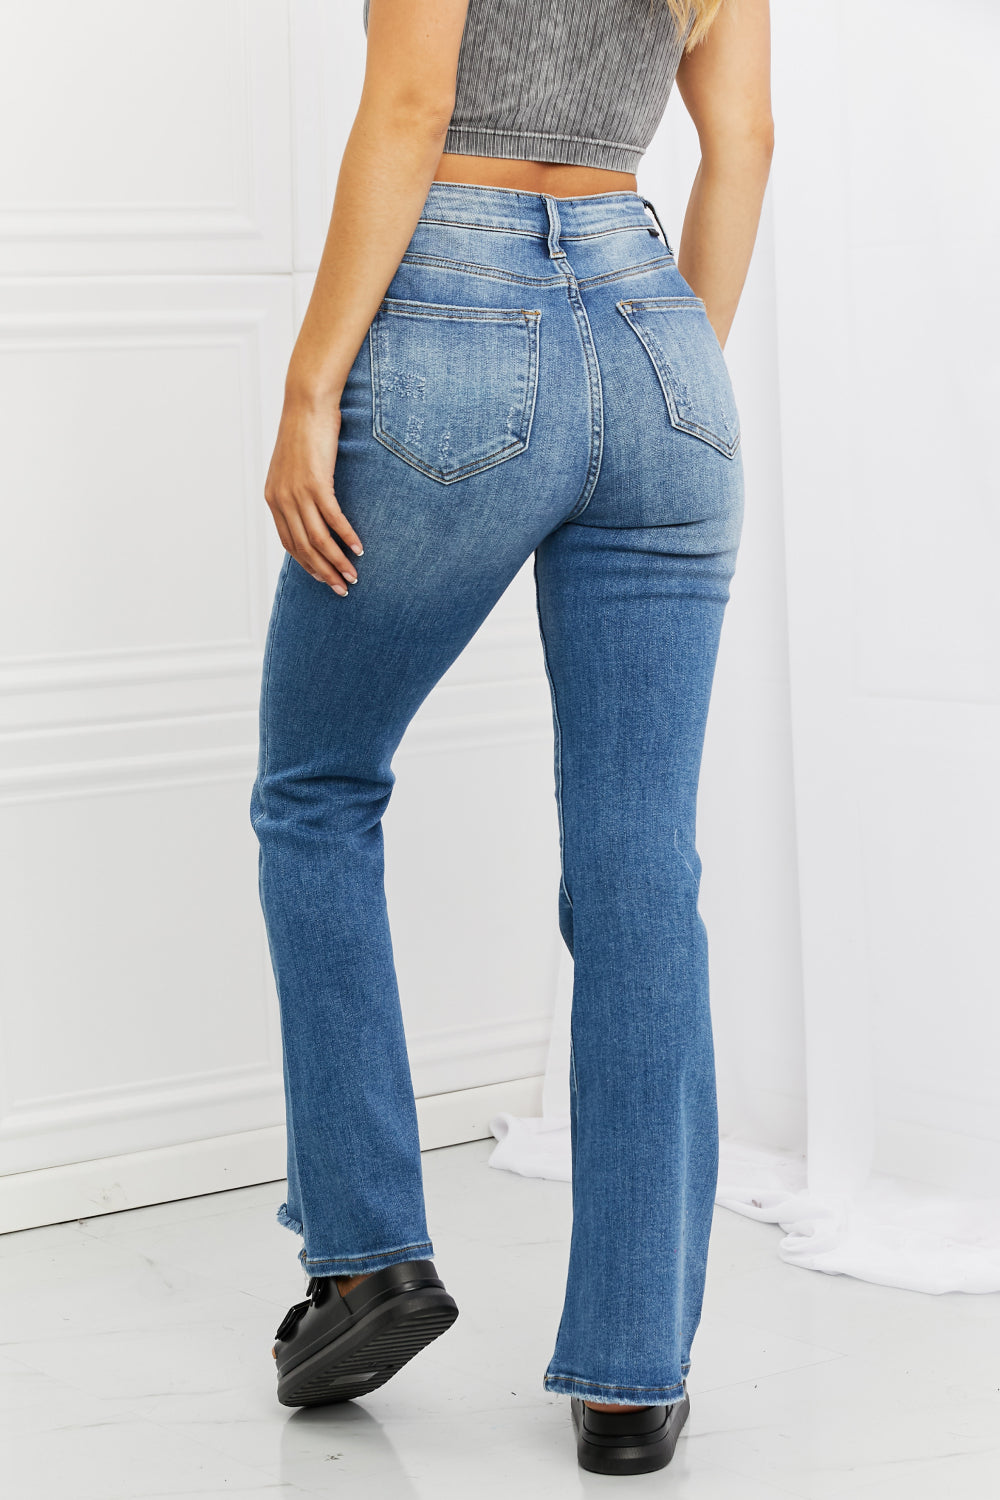 RISEN Iris High Waisted Flare Jeans - Copper + Rose